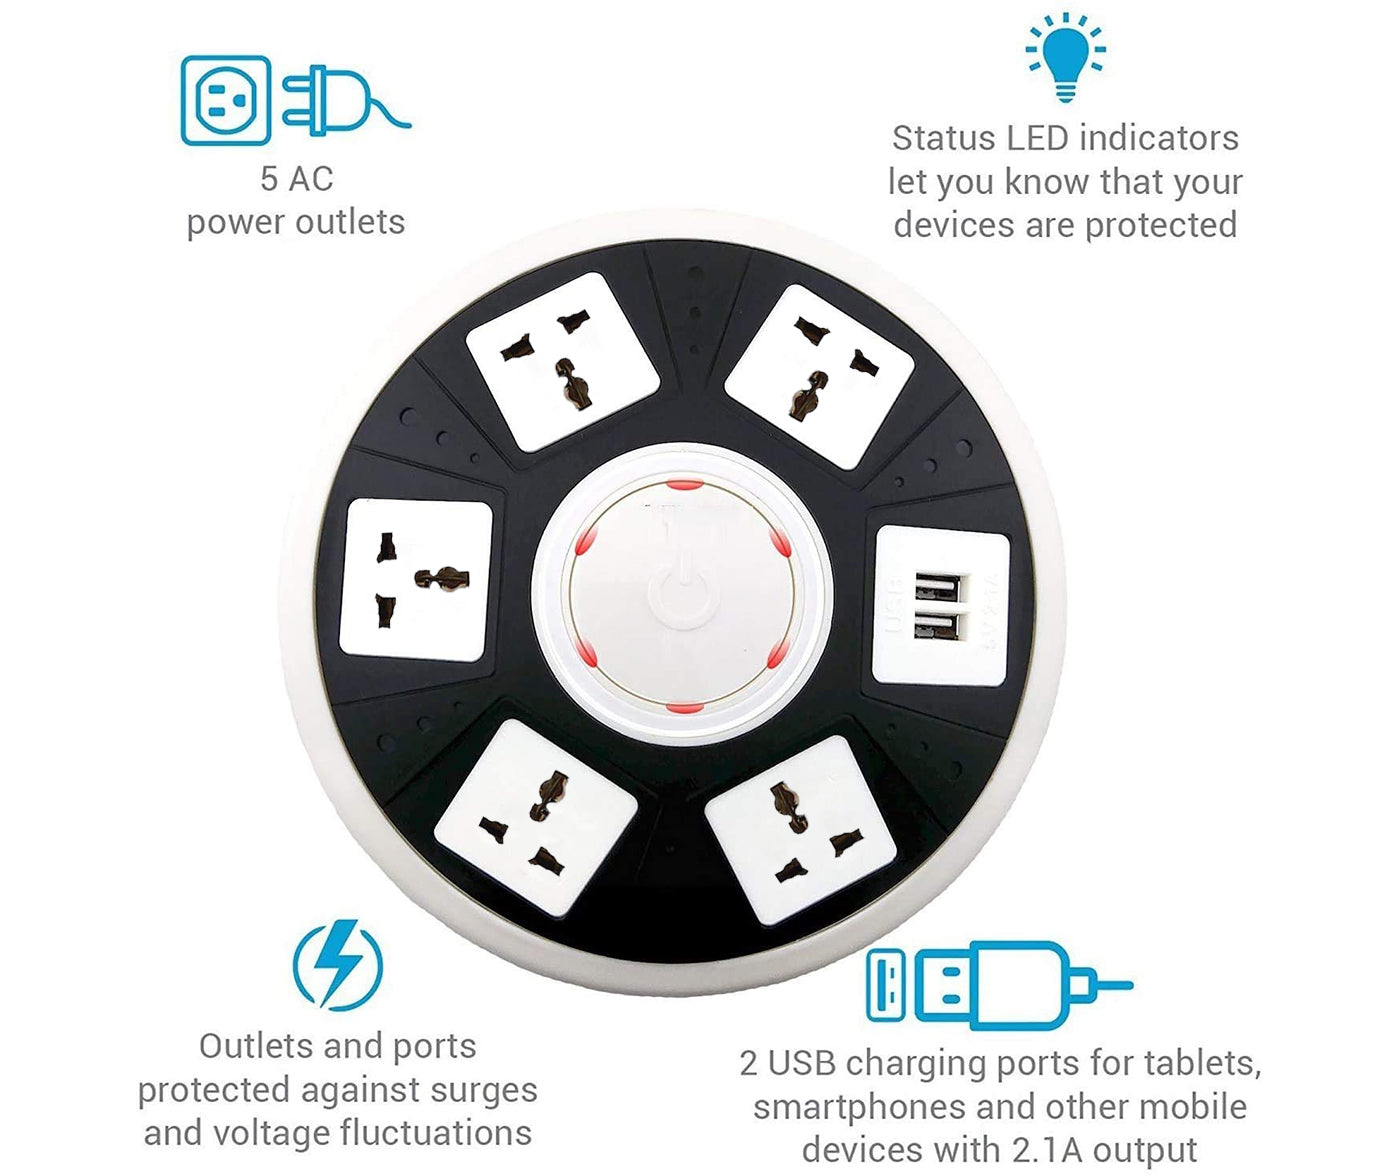 EYUVAA UFO Shape Residential USB Extension Socket 5 AC US Outlets 2 USB Outputs 110V 10A Power Strip with Overload Protector